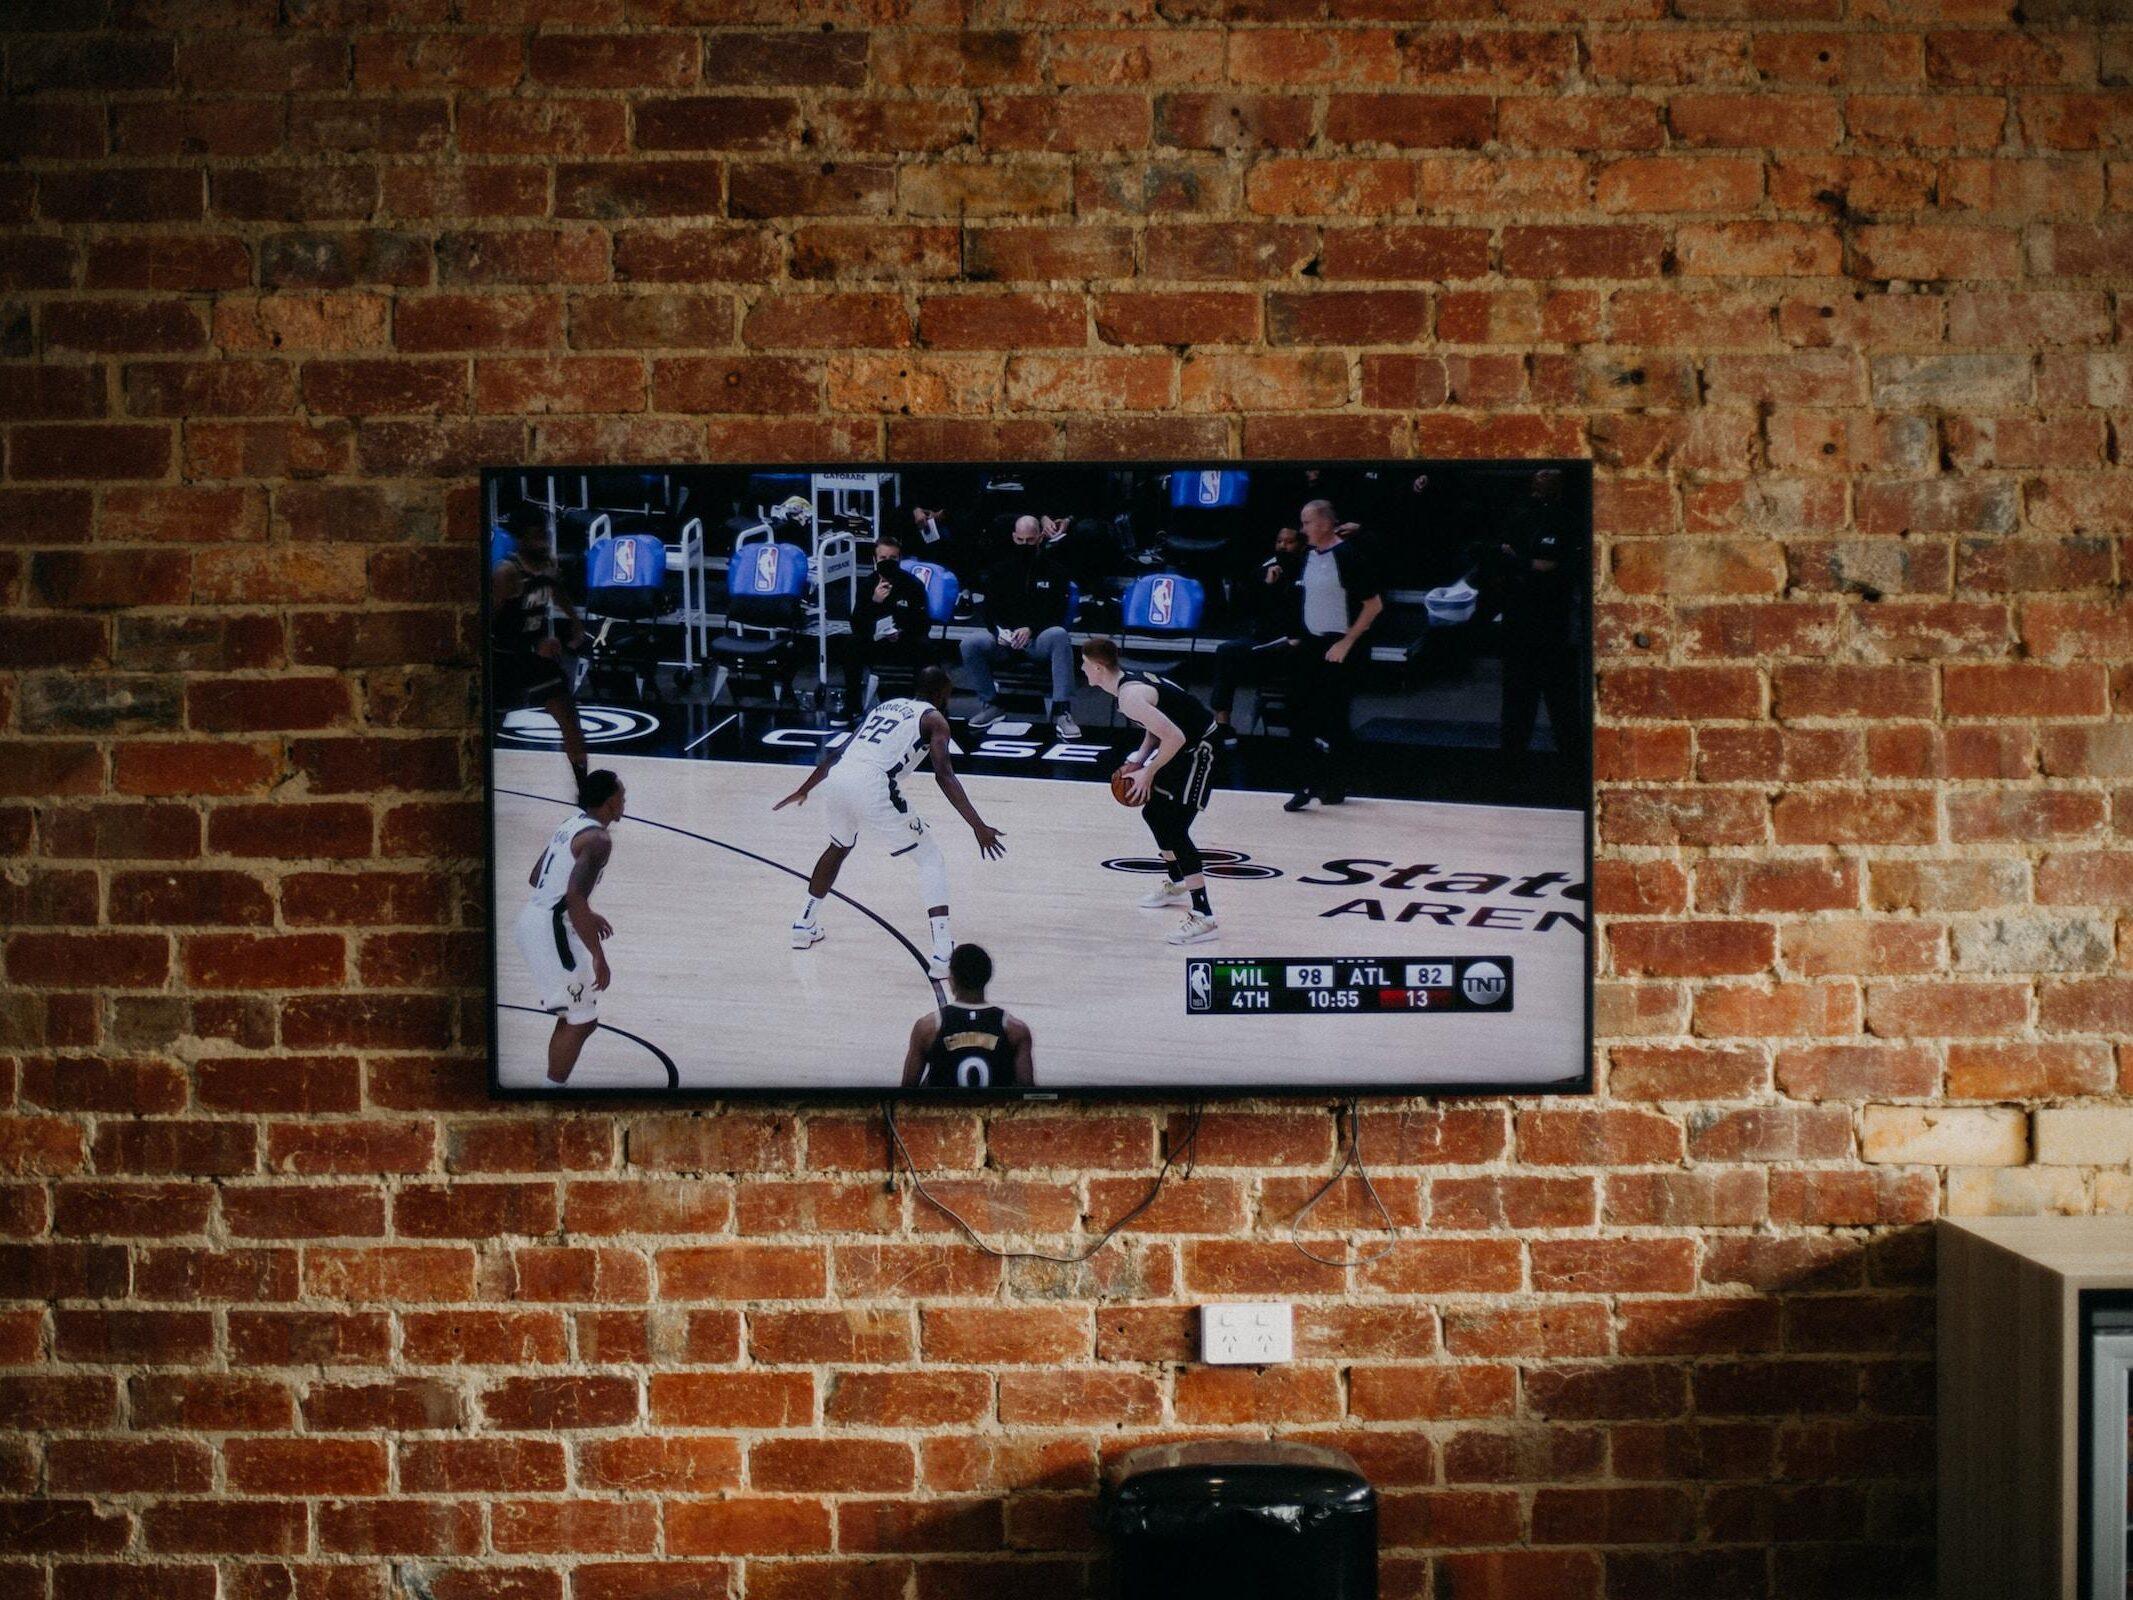 A flat screen TV mounted on a wall